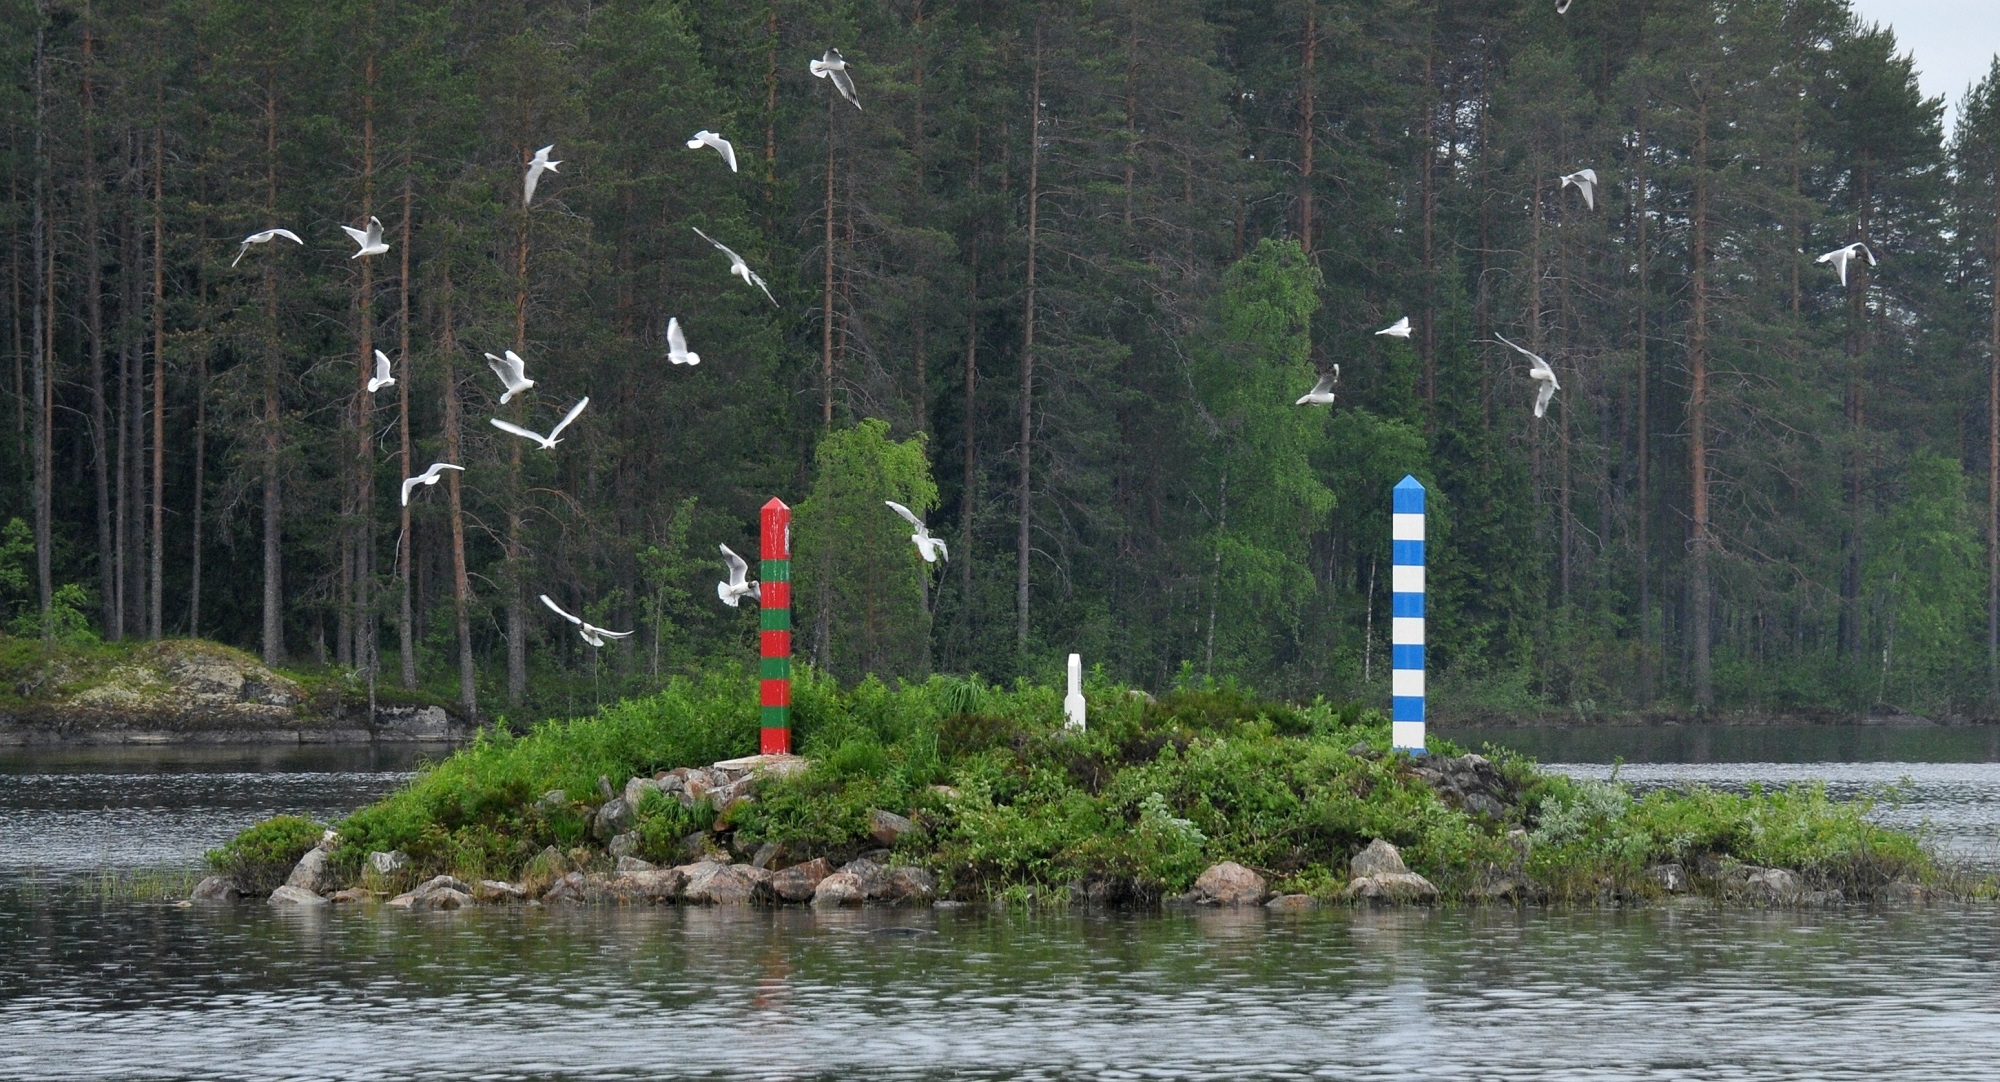 Gulls flying near the border poles marking the border between Finland and Russia.